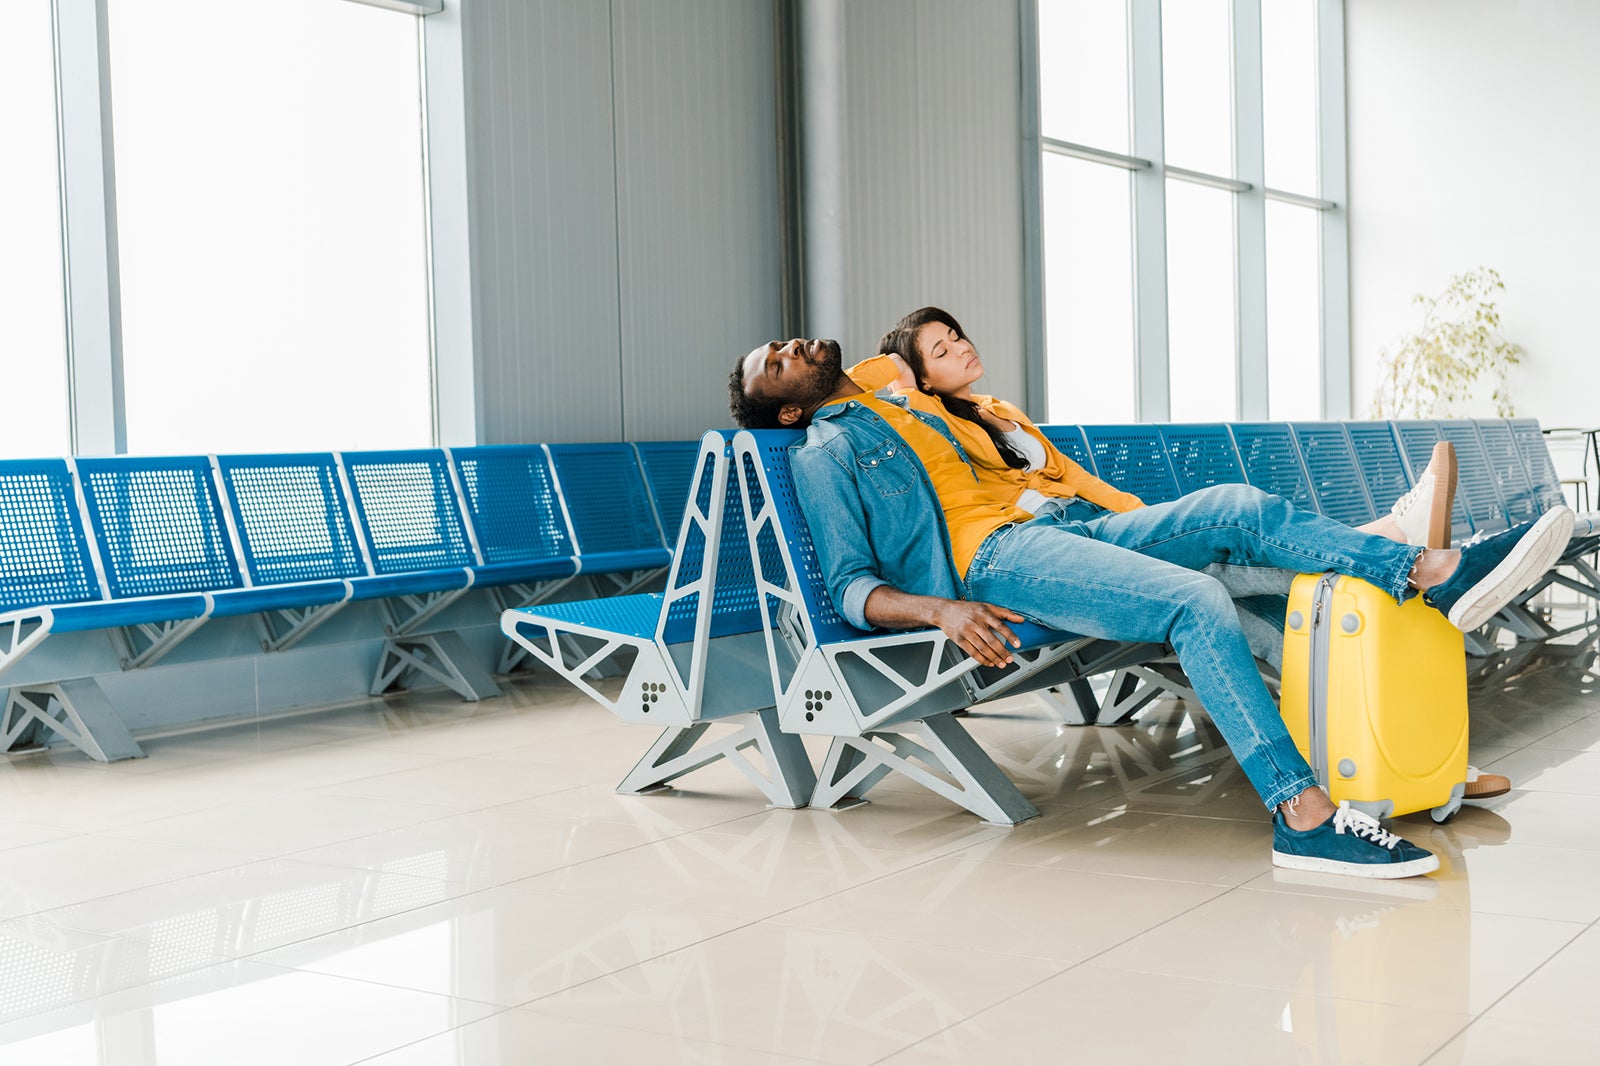 Is there a time limit to stay in airport lounge?